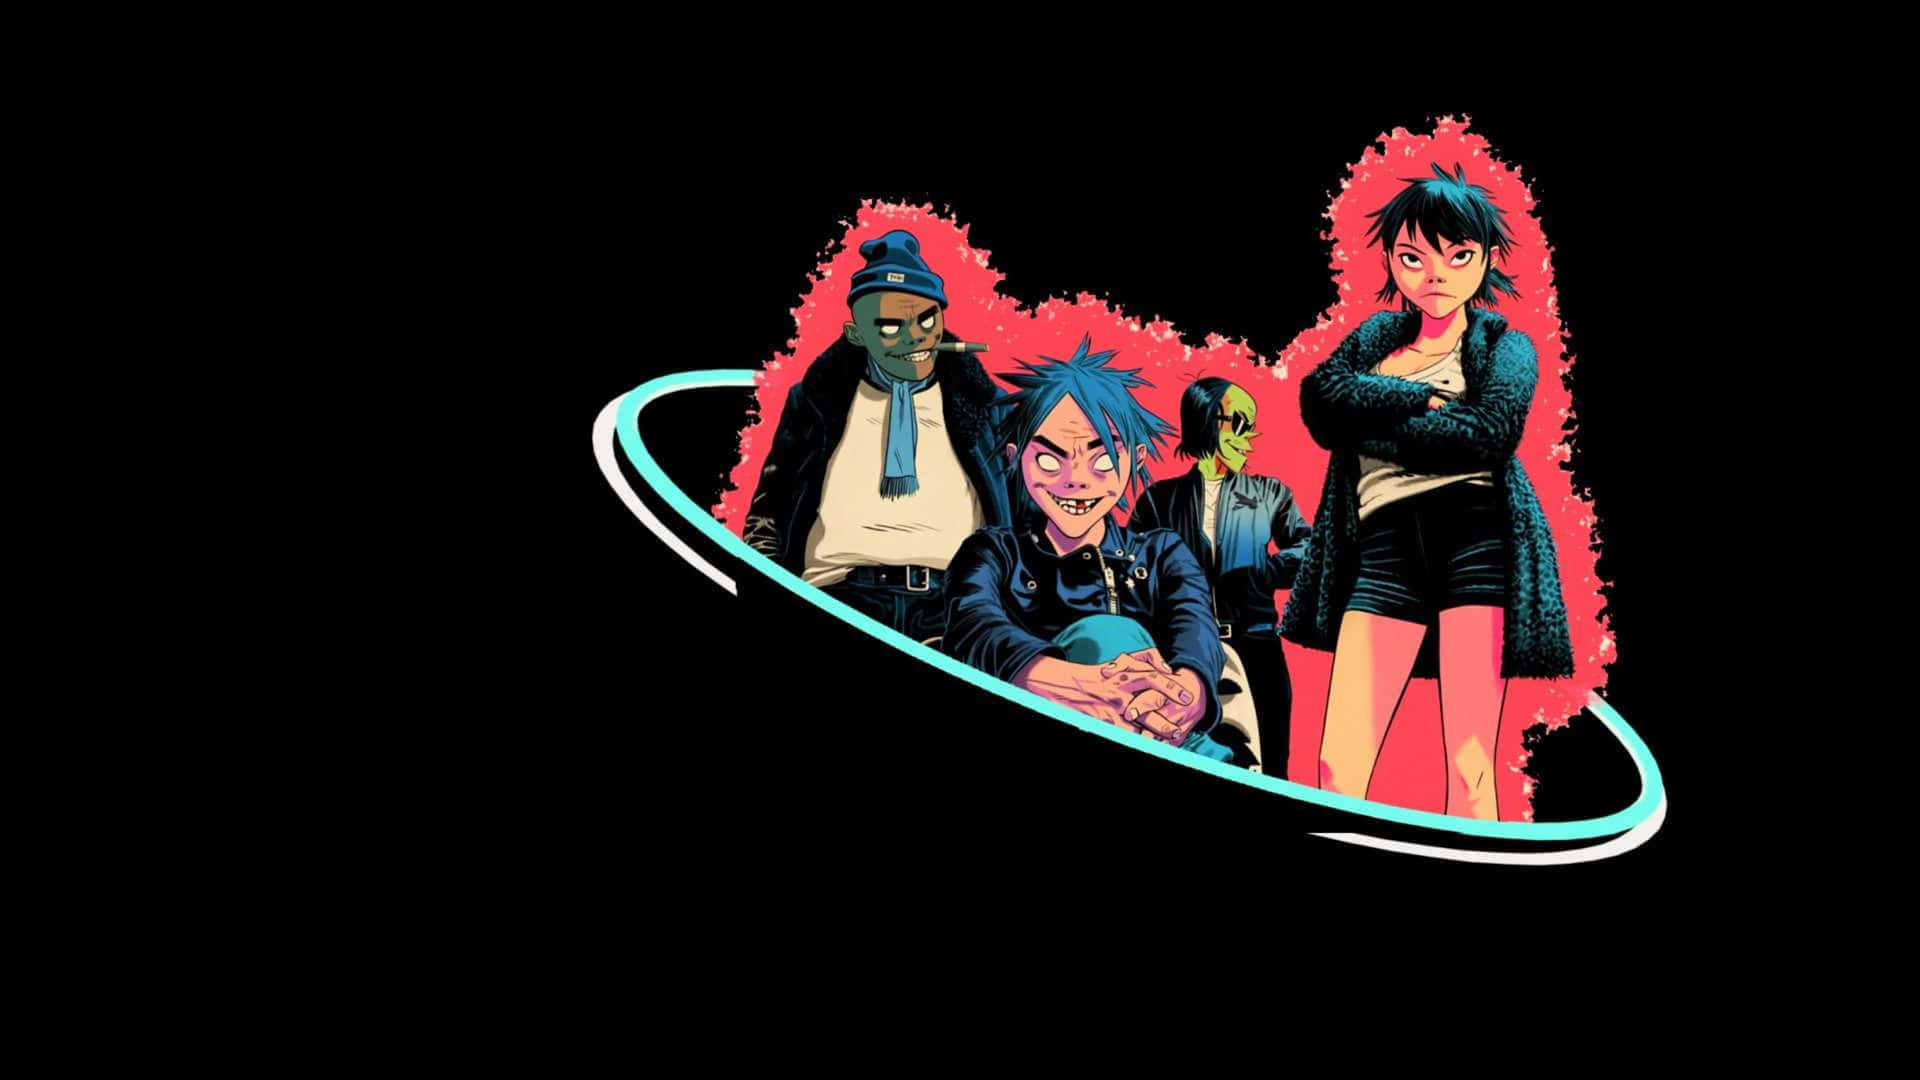 The Gorillaz Are Here To Take Over!